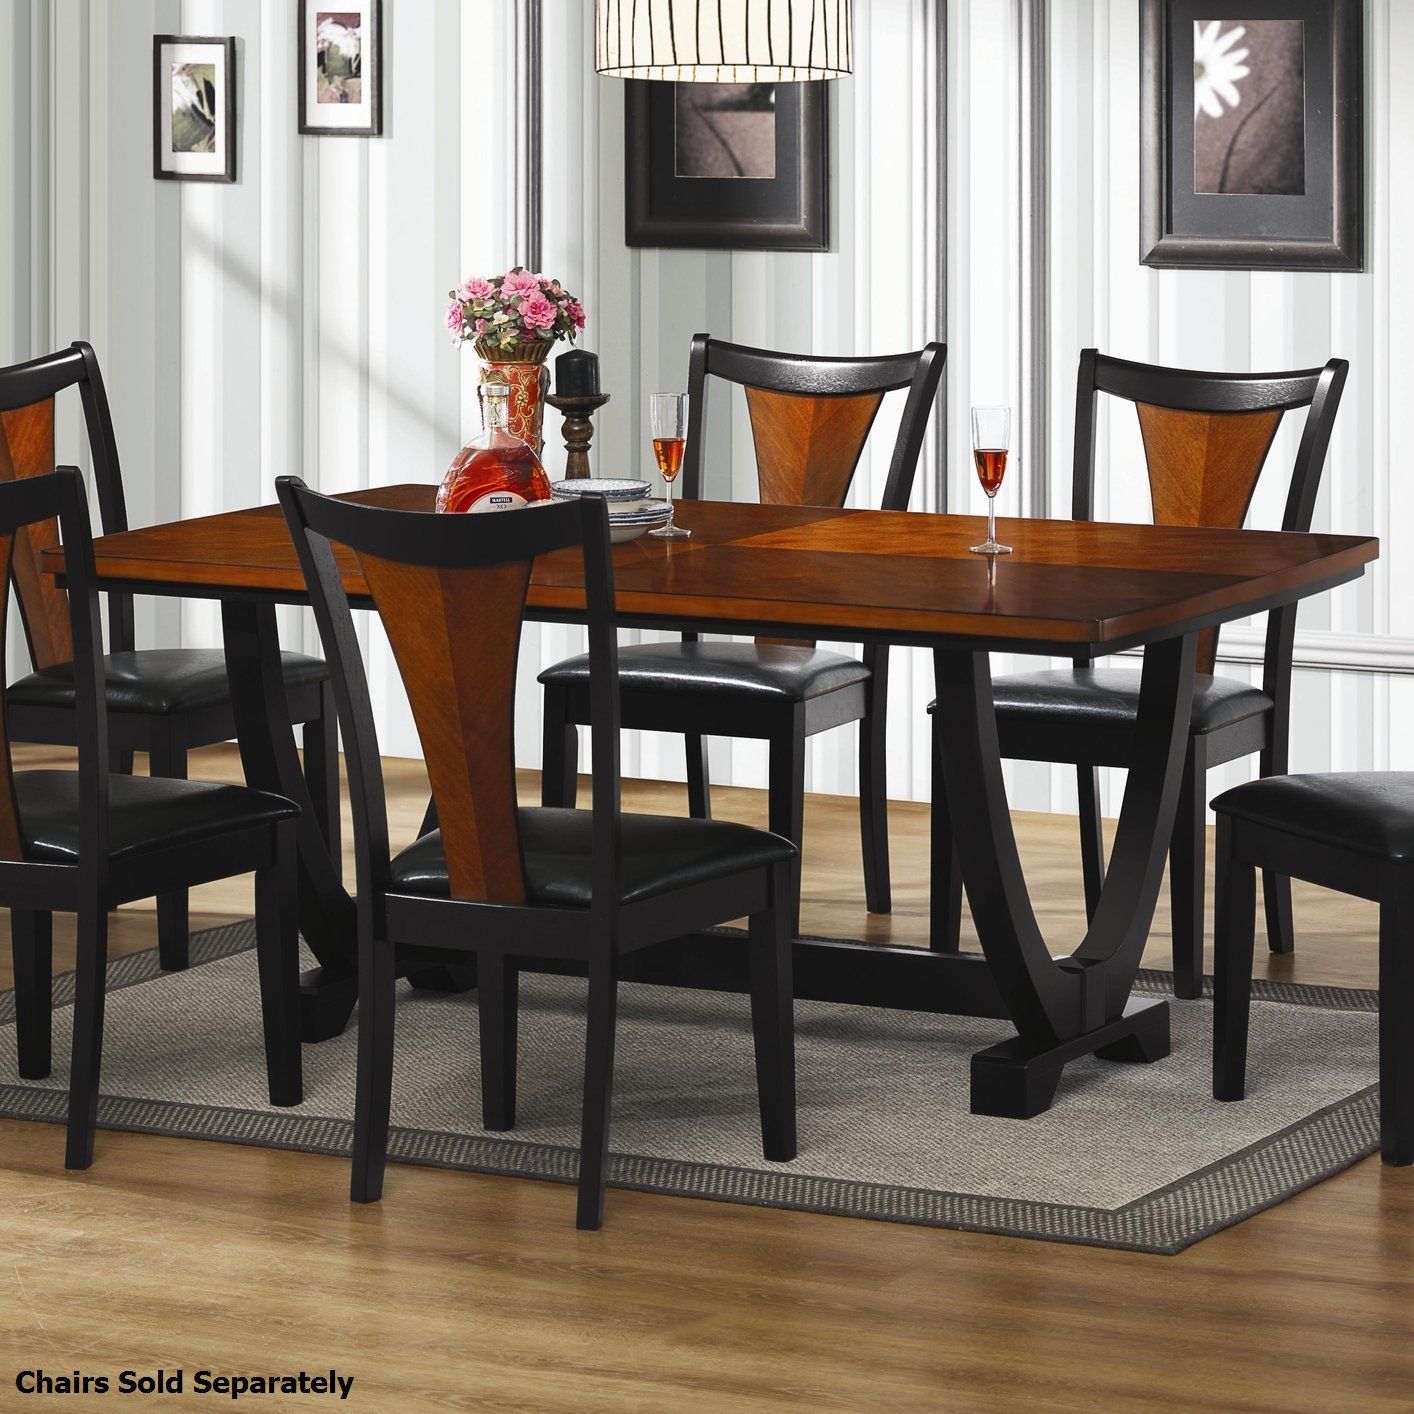 Dining Table With Sofa Chairs Lpuite For Dining Table With Sofa Chairs (View 8 of 15)